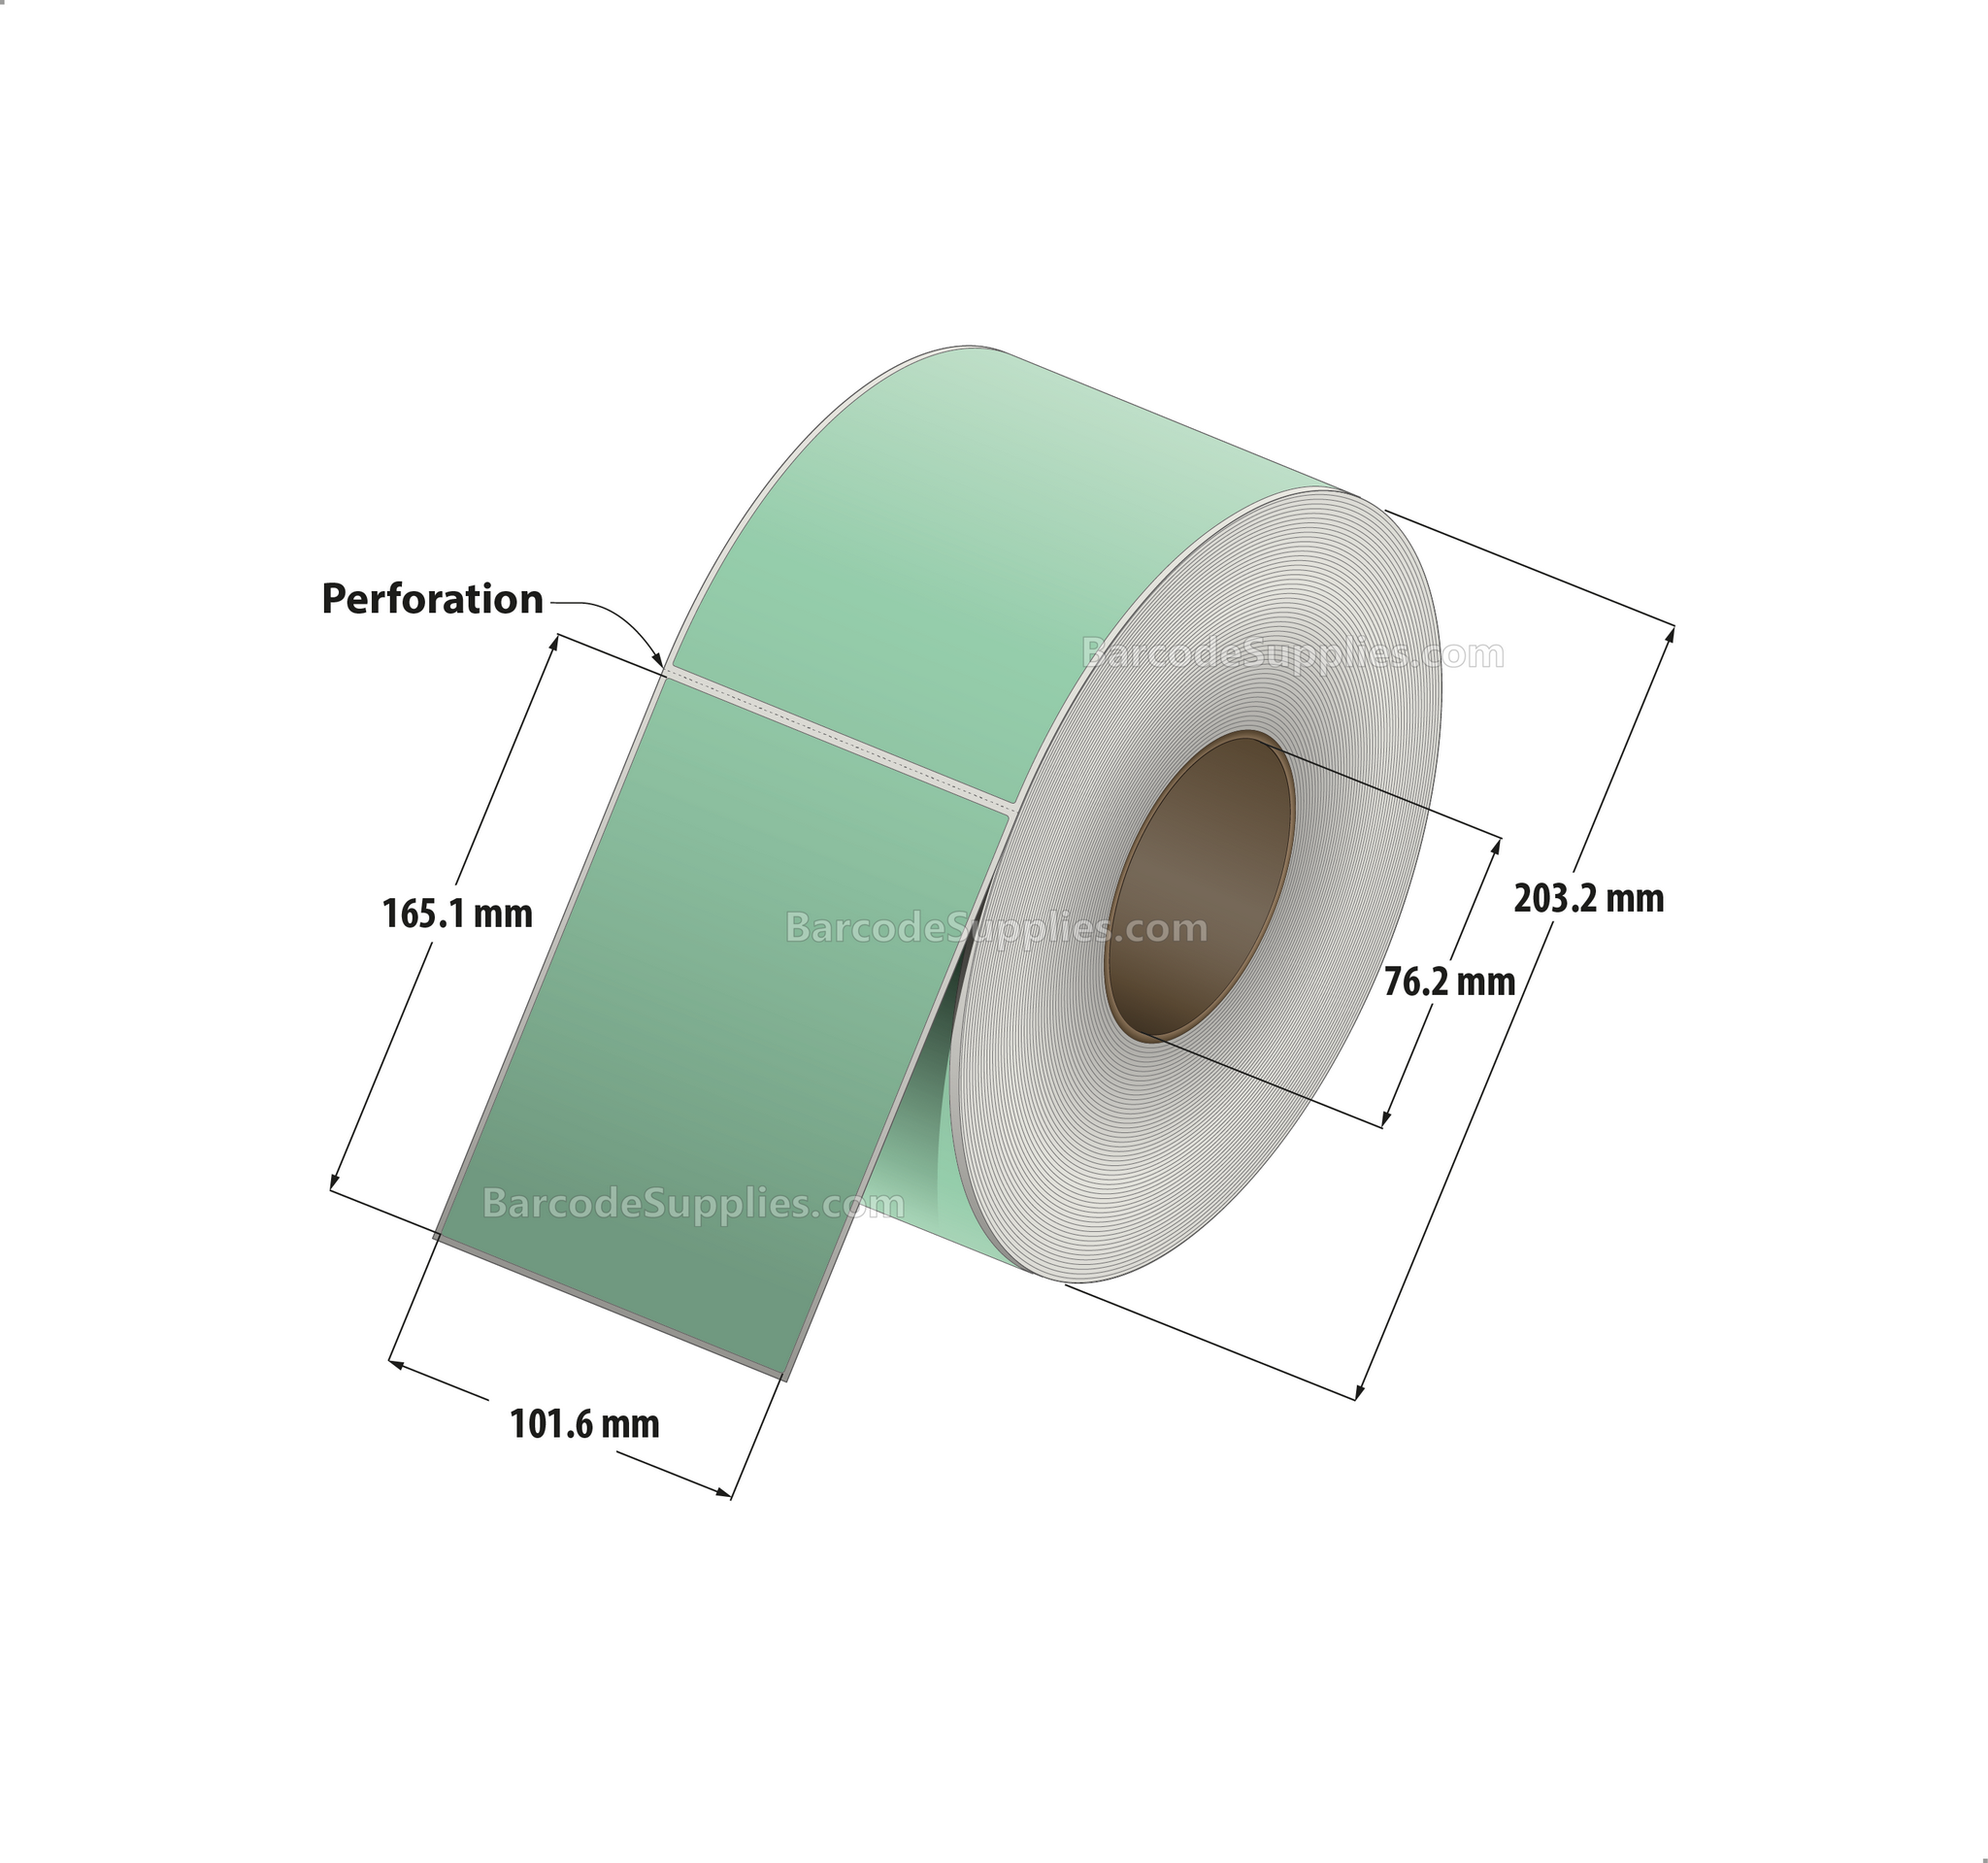 4 x 6.5 Thermal Transfer 345 Green Labels With Permanent Adhesive - Perforated - 900 Labels Per Roll - Carton Of 4 Rolls - 3600 Labels Total - MPN: RFC-4-65-900-GR